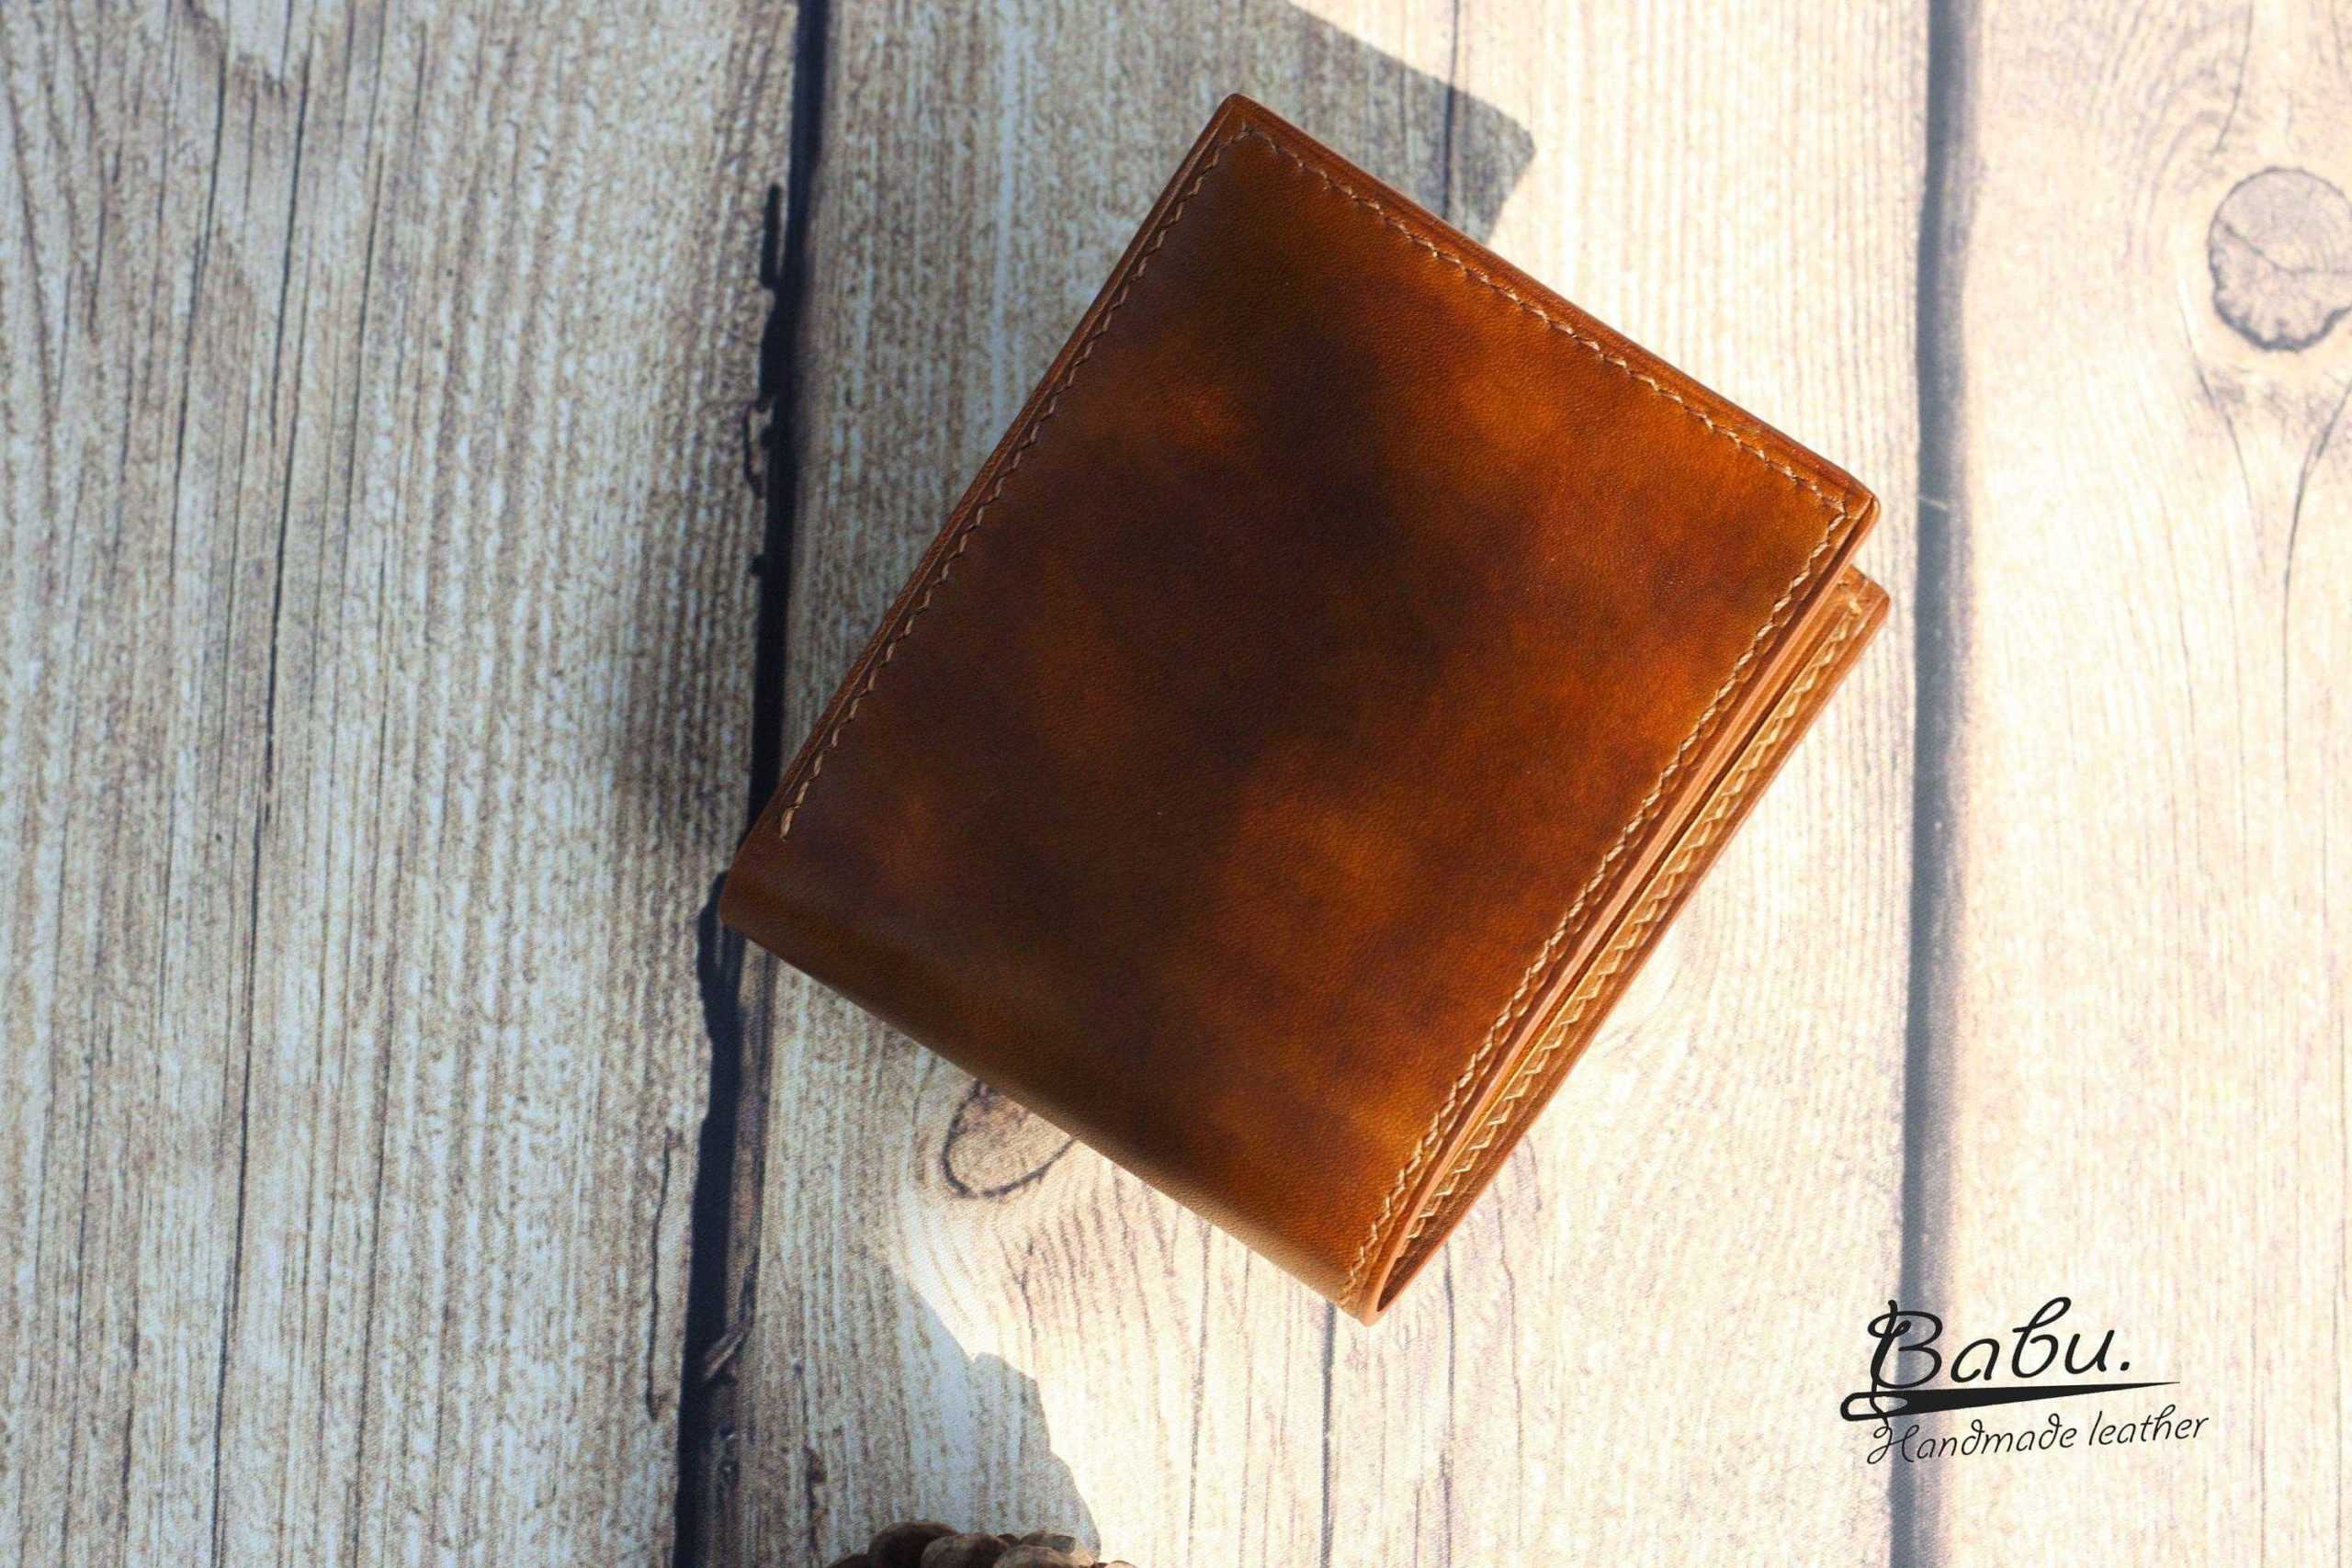 patina brown vegetable tanned leather wallet for men